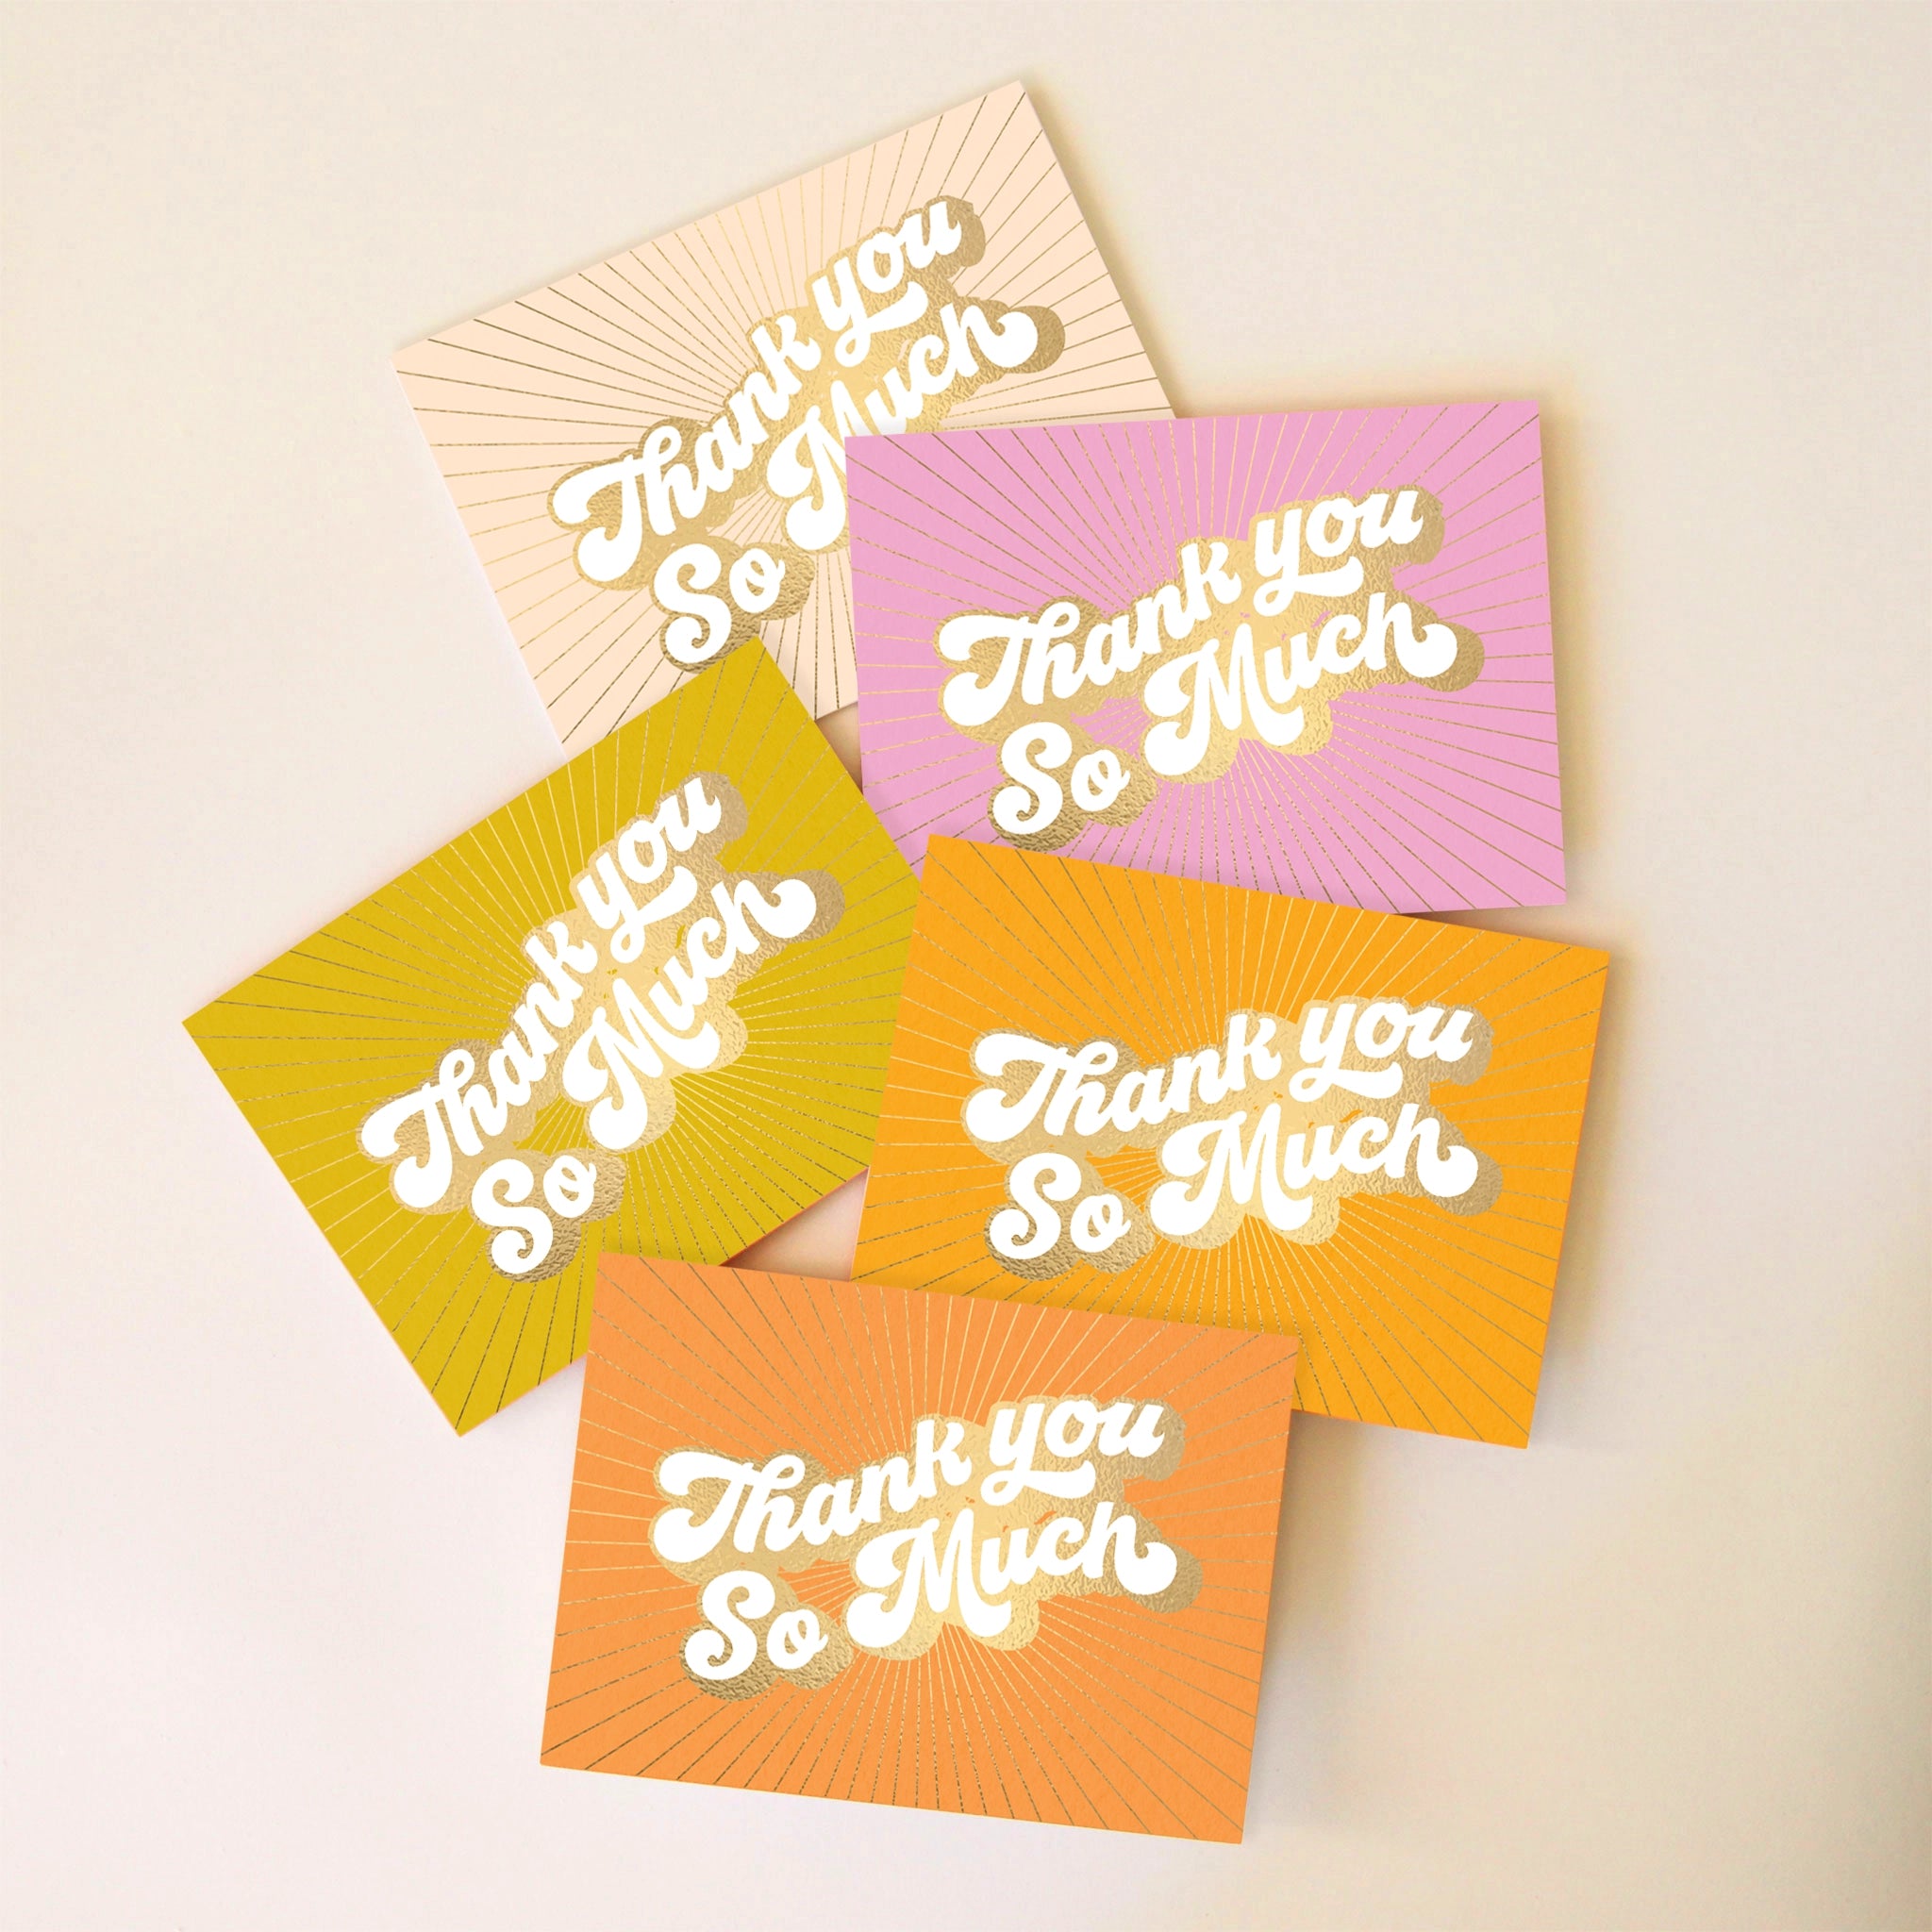 On an ivory background is a pack of 5 thank you cards in a variety of colors that all read, "Thank You So Much" in white letters and gold foiled outlined.